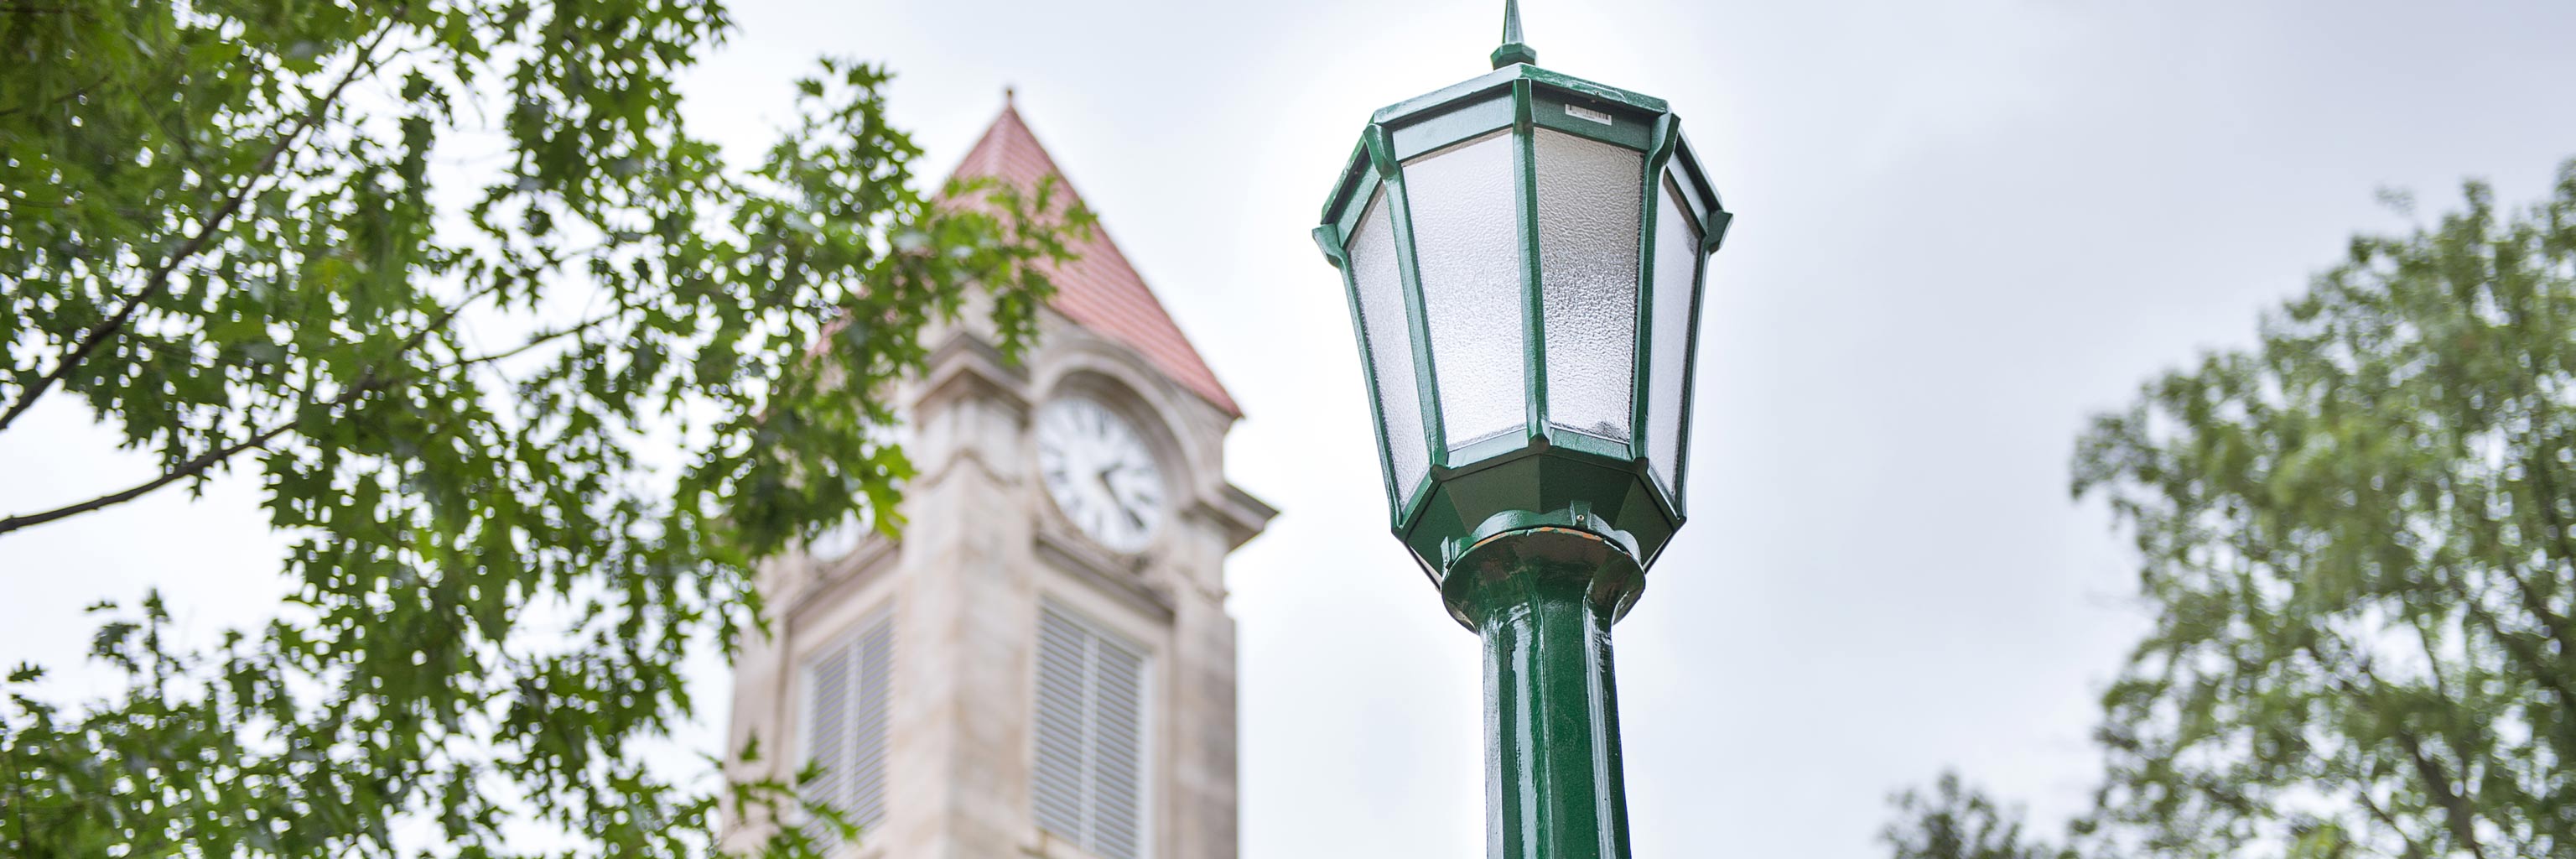 Lamp post and clock tower